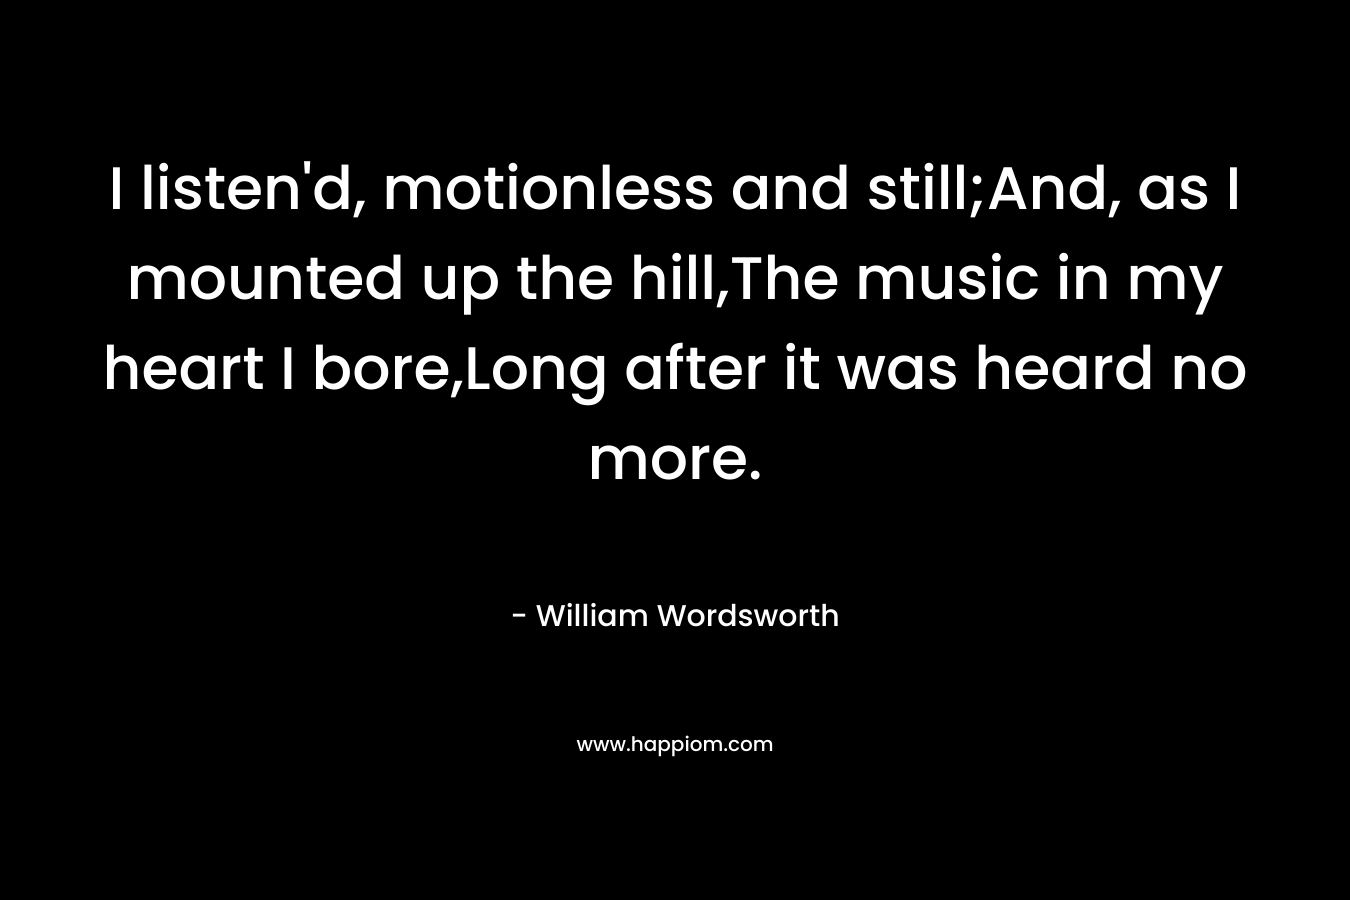 I listen’d, motionless and still;And, as I mounted up the hill,The music in my heart I bore,Long after it was heard no more. – William Wordsworth